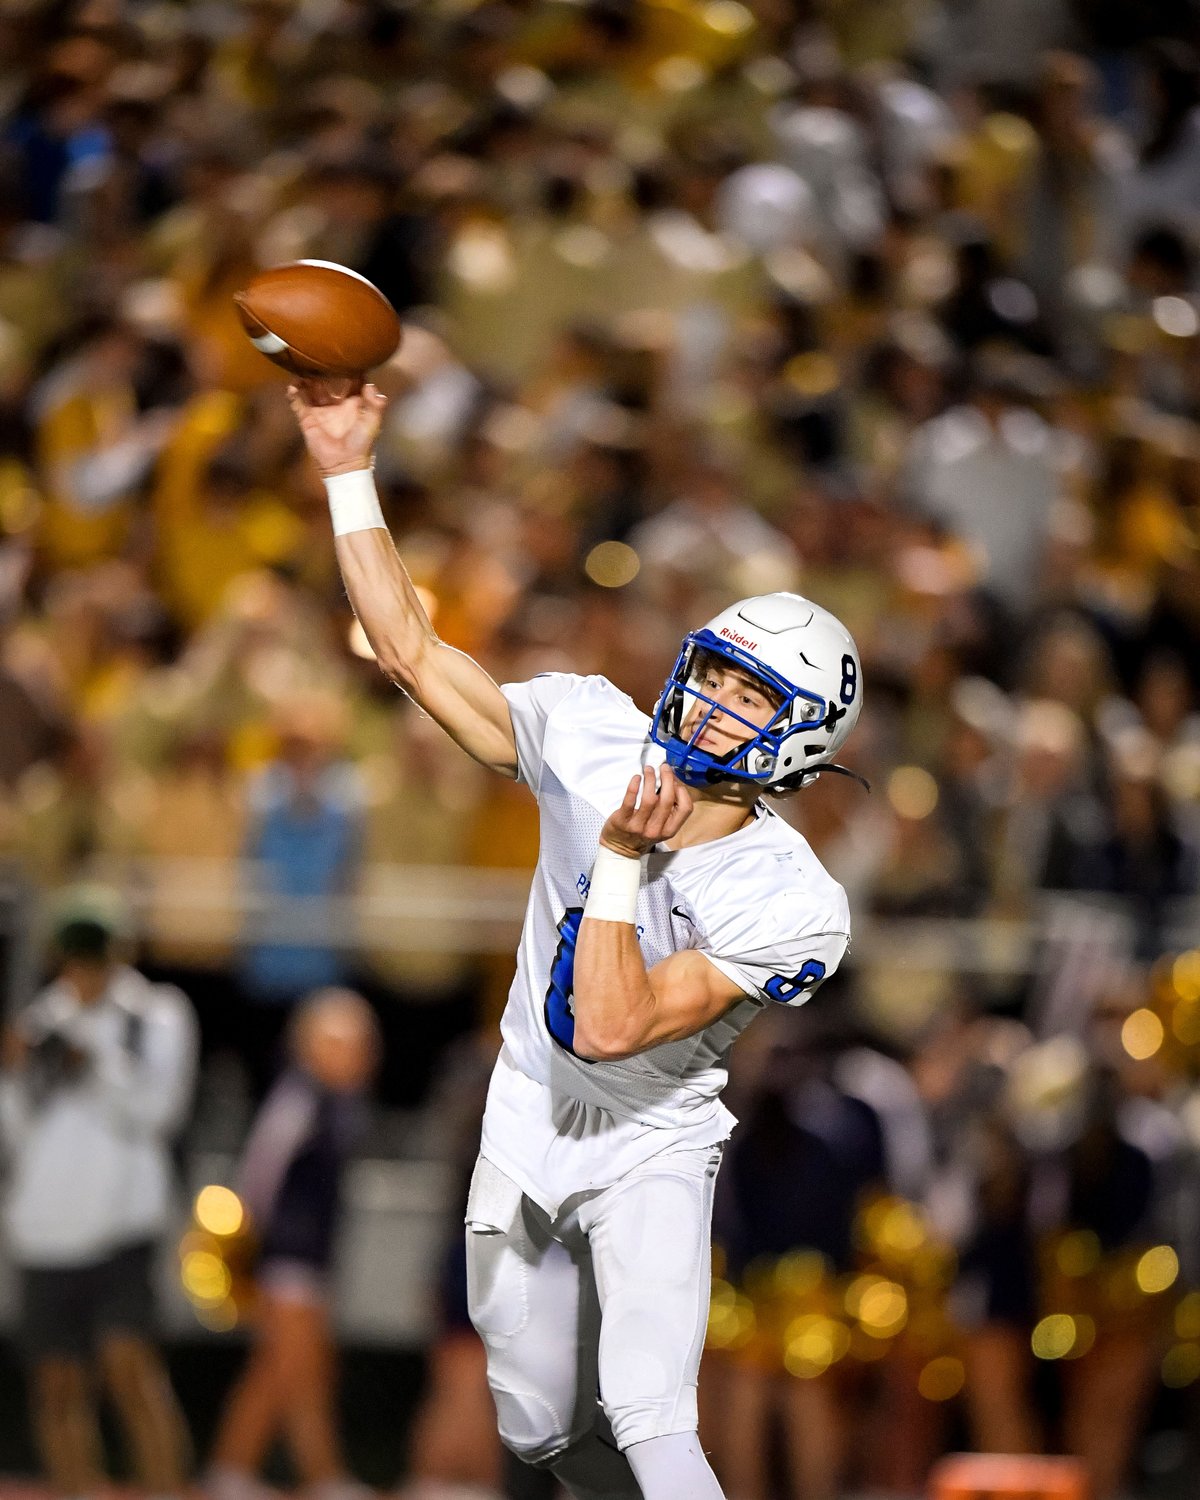 Quakertown’s Vince Micucci throws a pass.